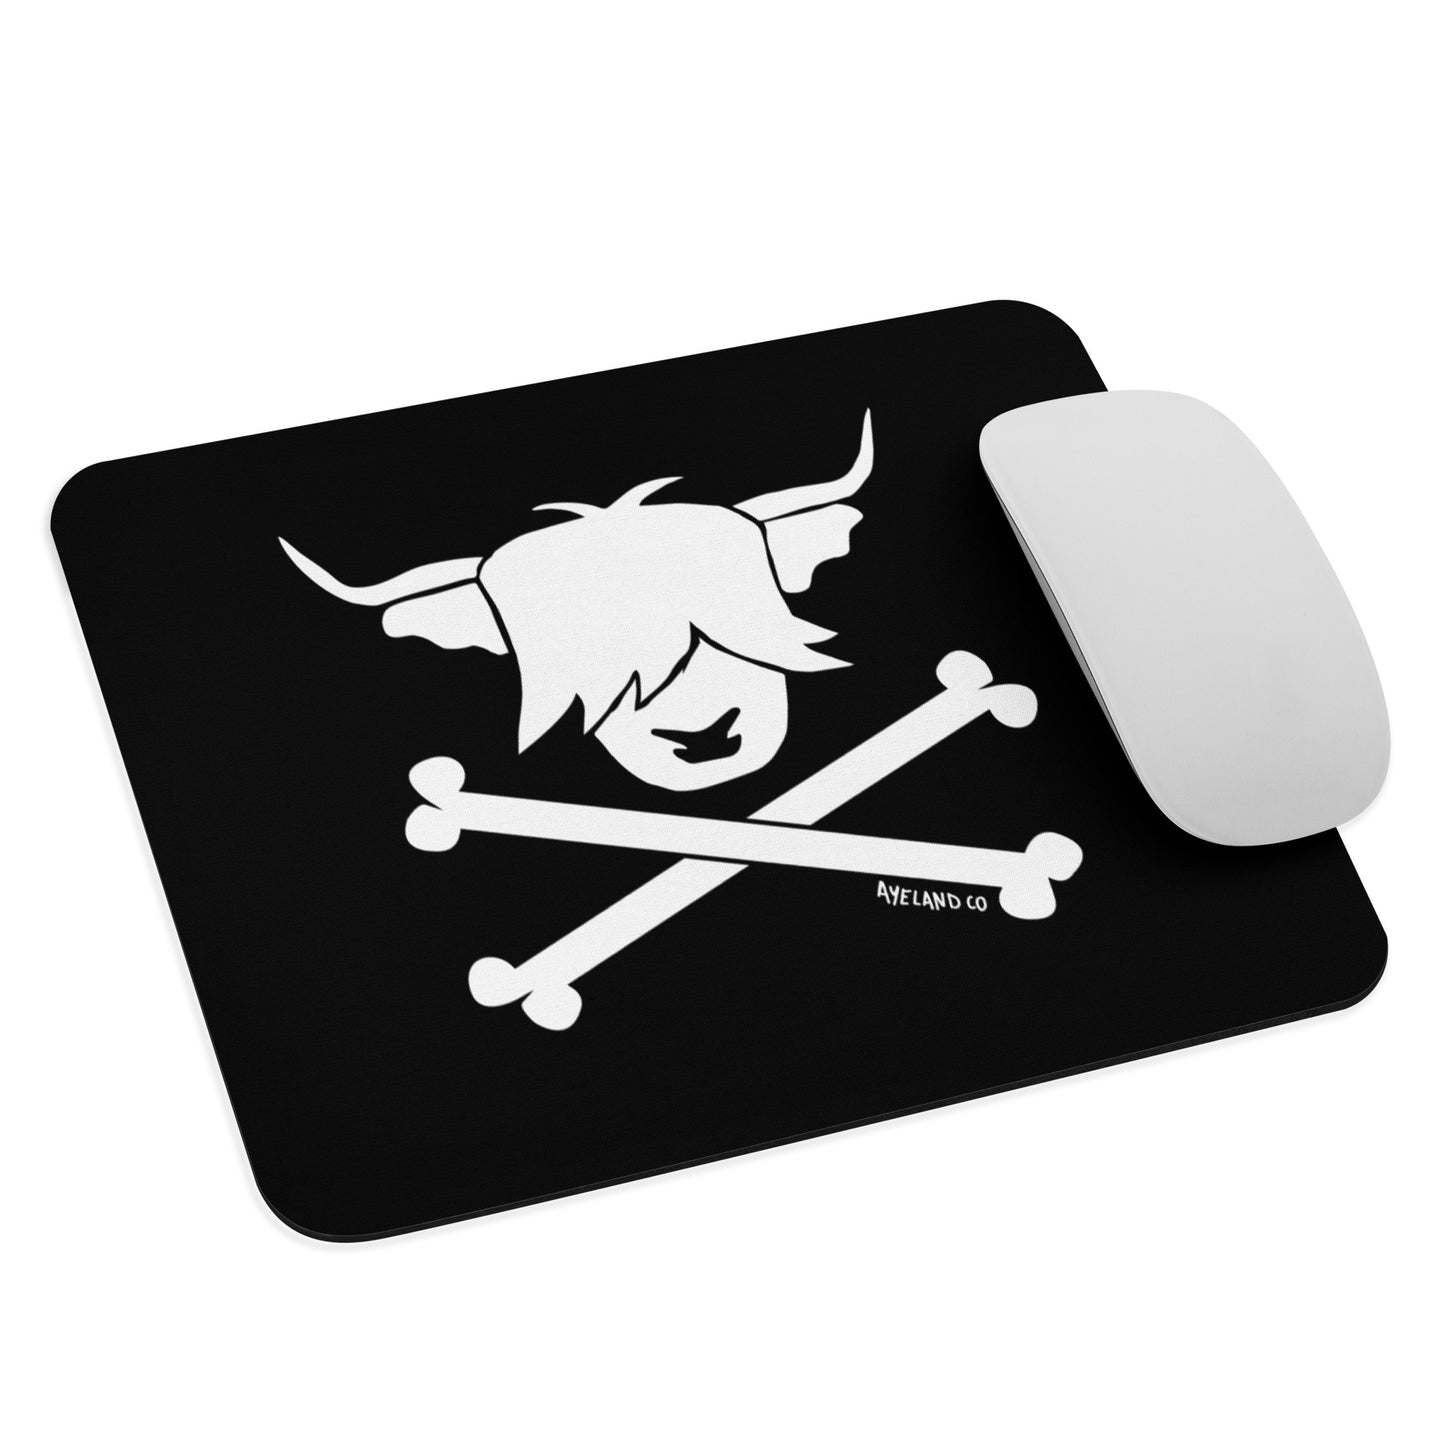 Highland cow pirate skull crossbones mouse pad